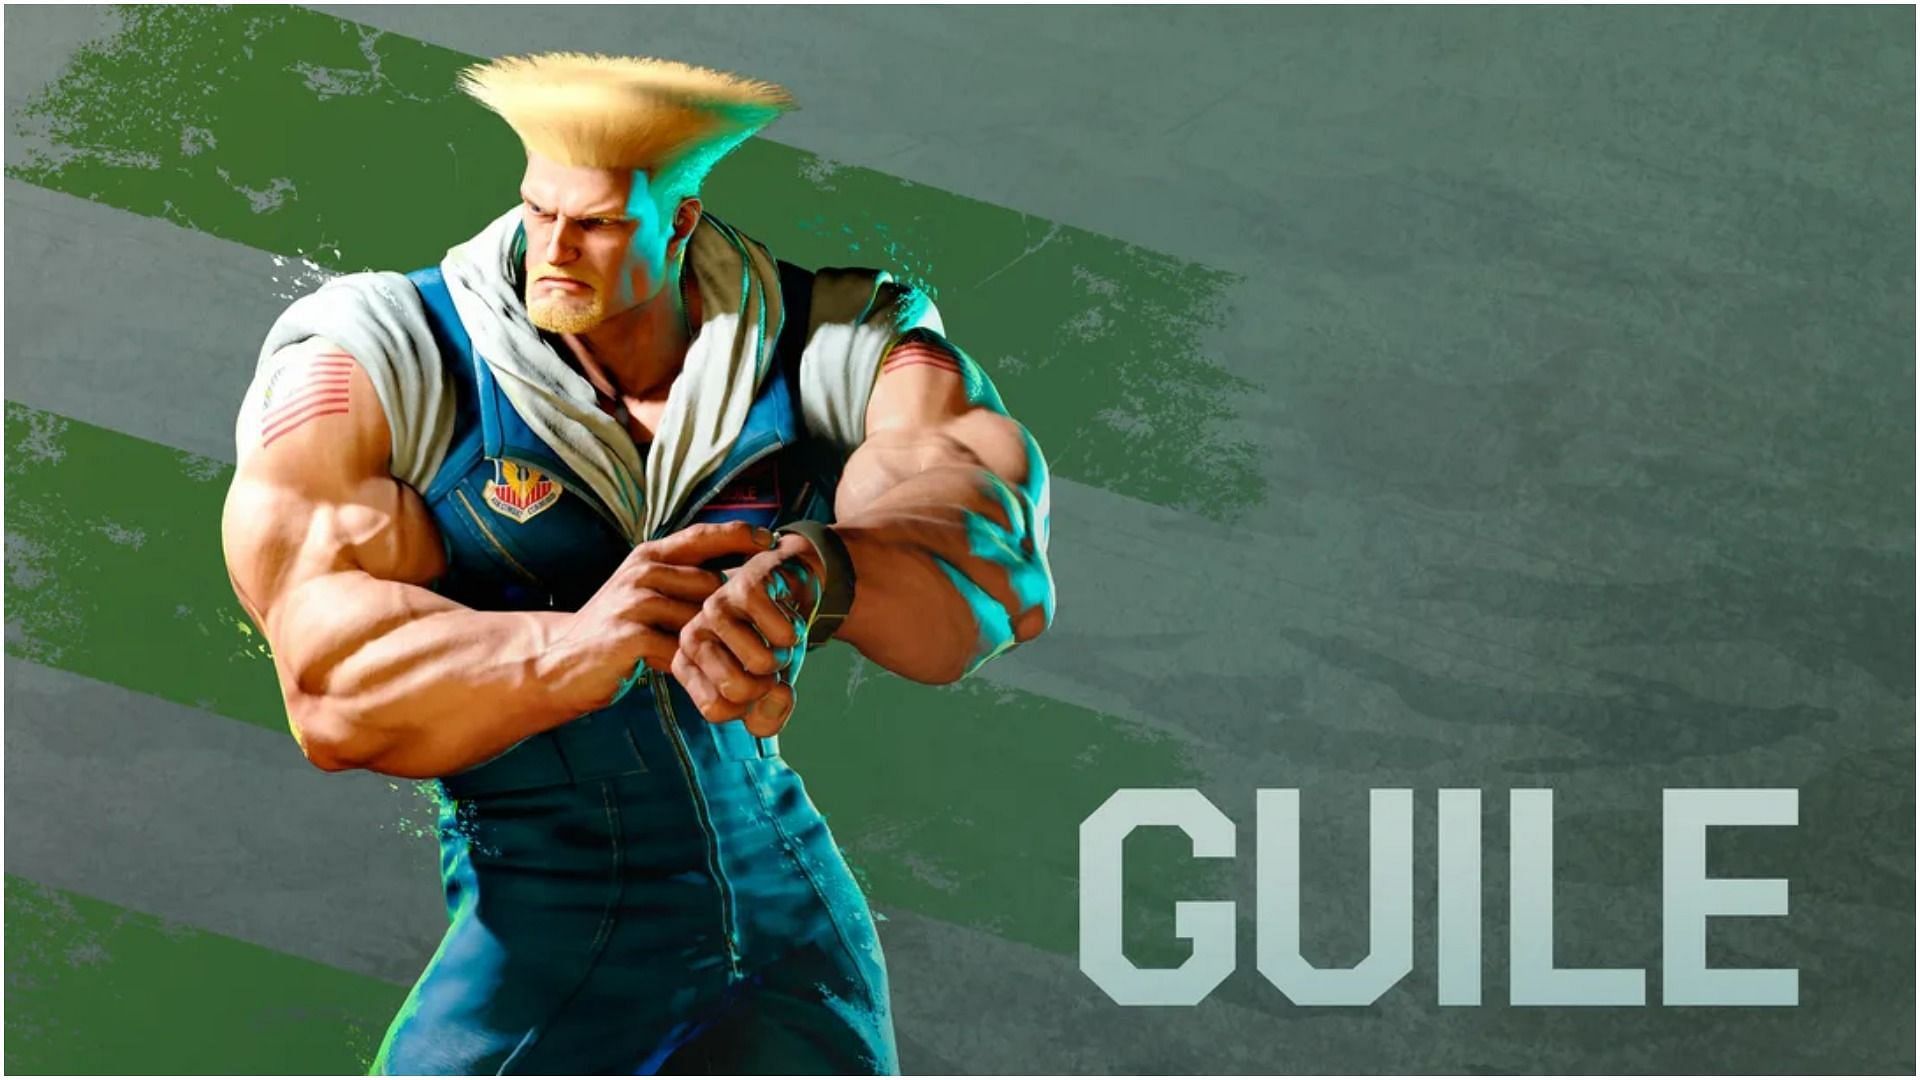 During Summer Game Fest 2022, Capcom revealed a new character for the upcoming Street Fighter 6 (Image via Capcom)